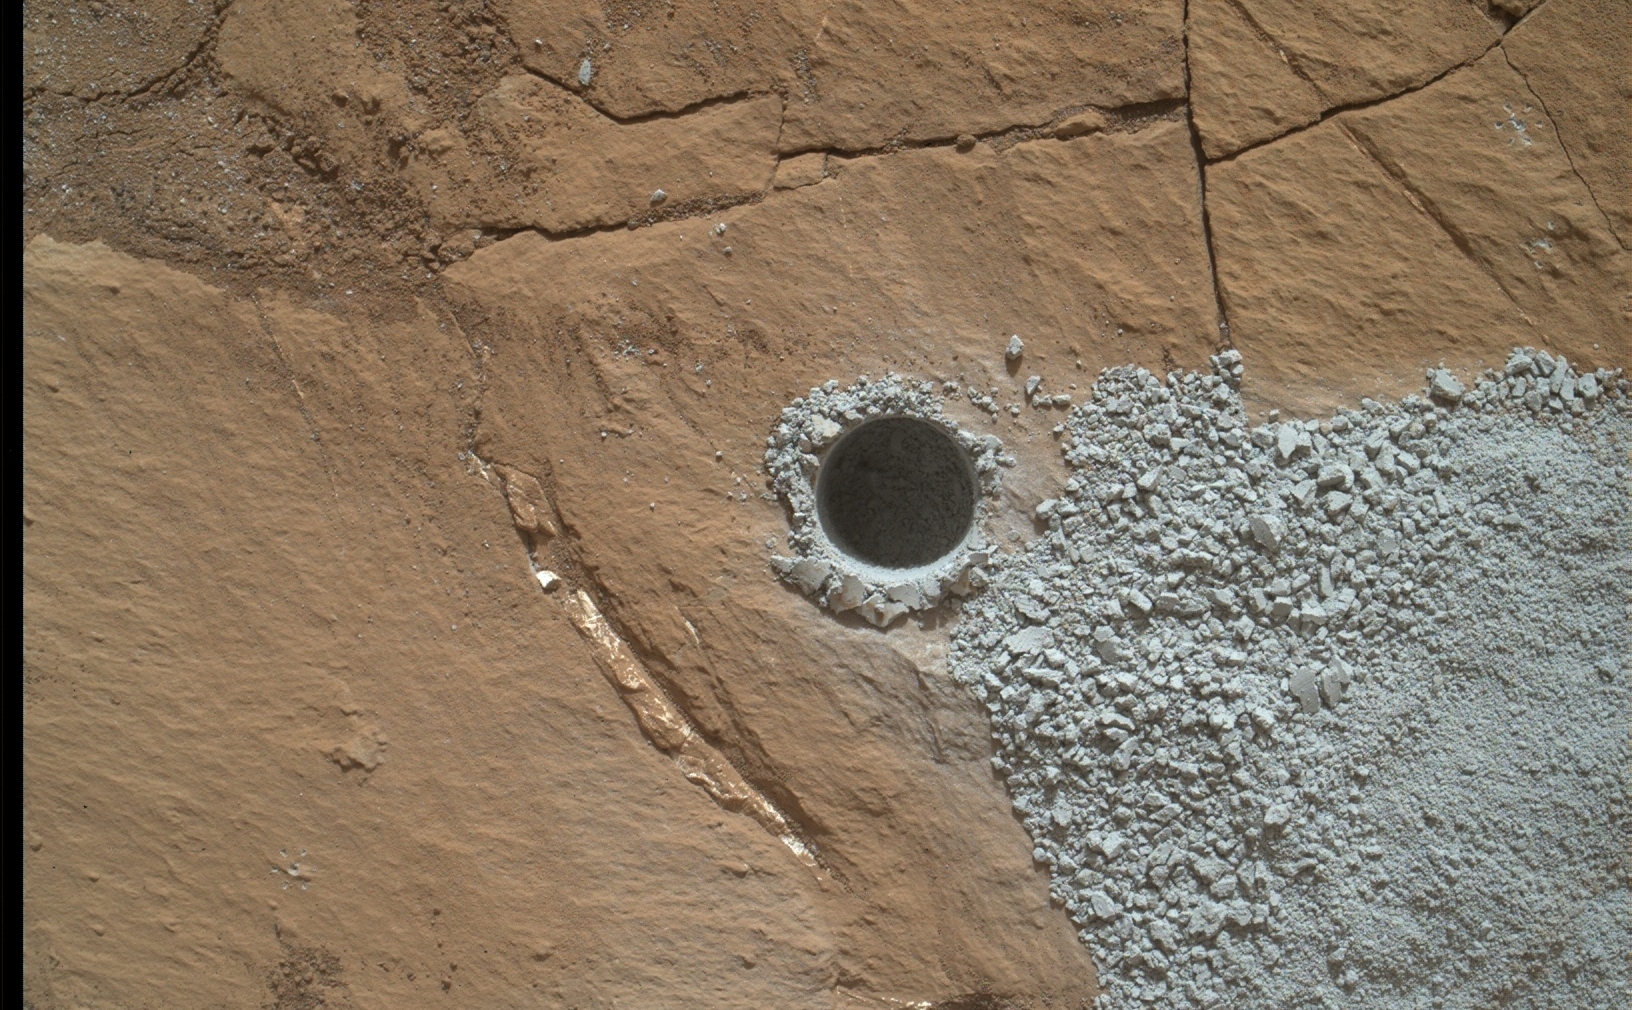 NASA's Curiosity Mars Rover drilled this hole to collect sample material from a rock target called "Buckskin" on July 30, 2015, about a week prior to the third anniversary of the rover's landing on Mars. The diameter is slightly smaller than a U.S. dime.